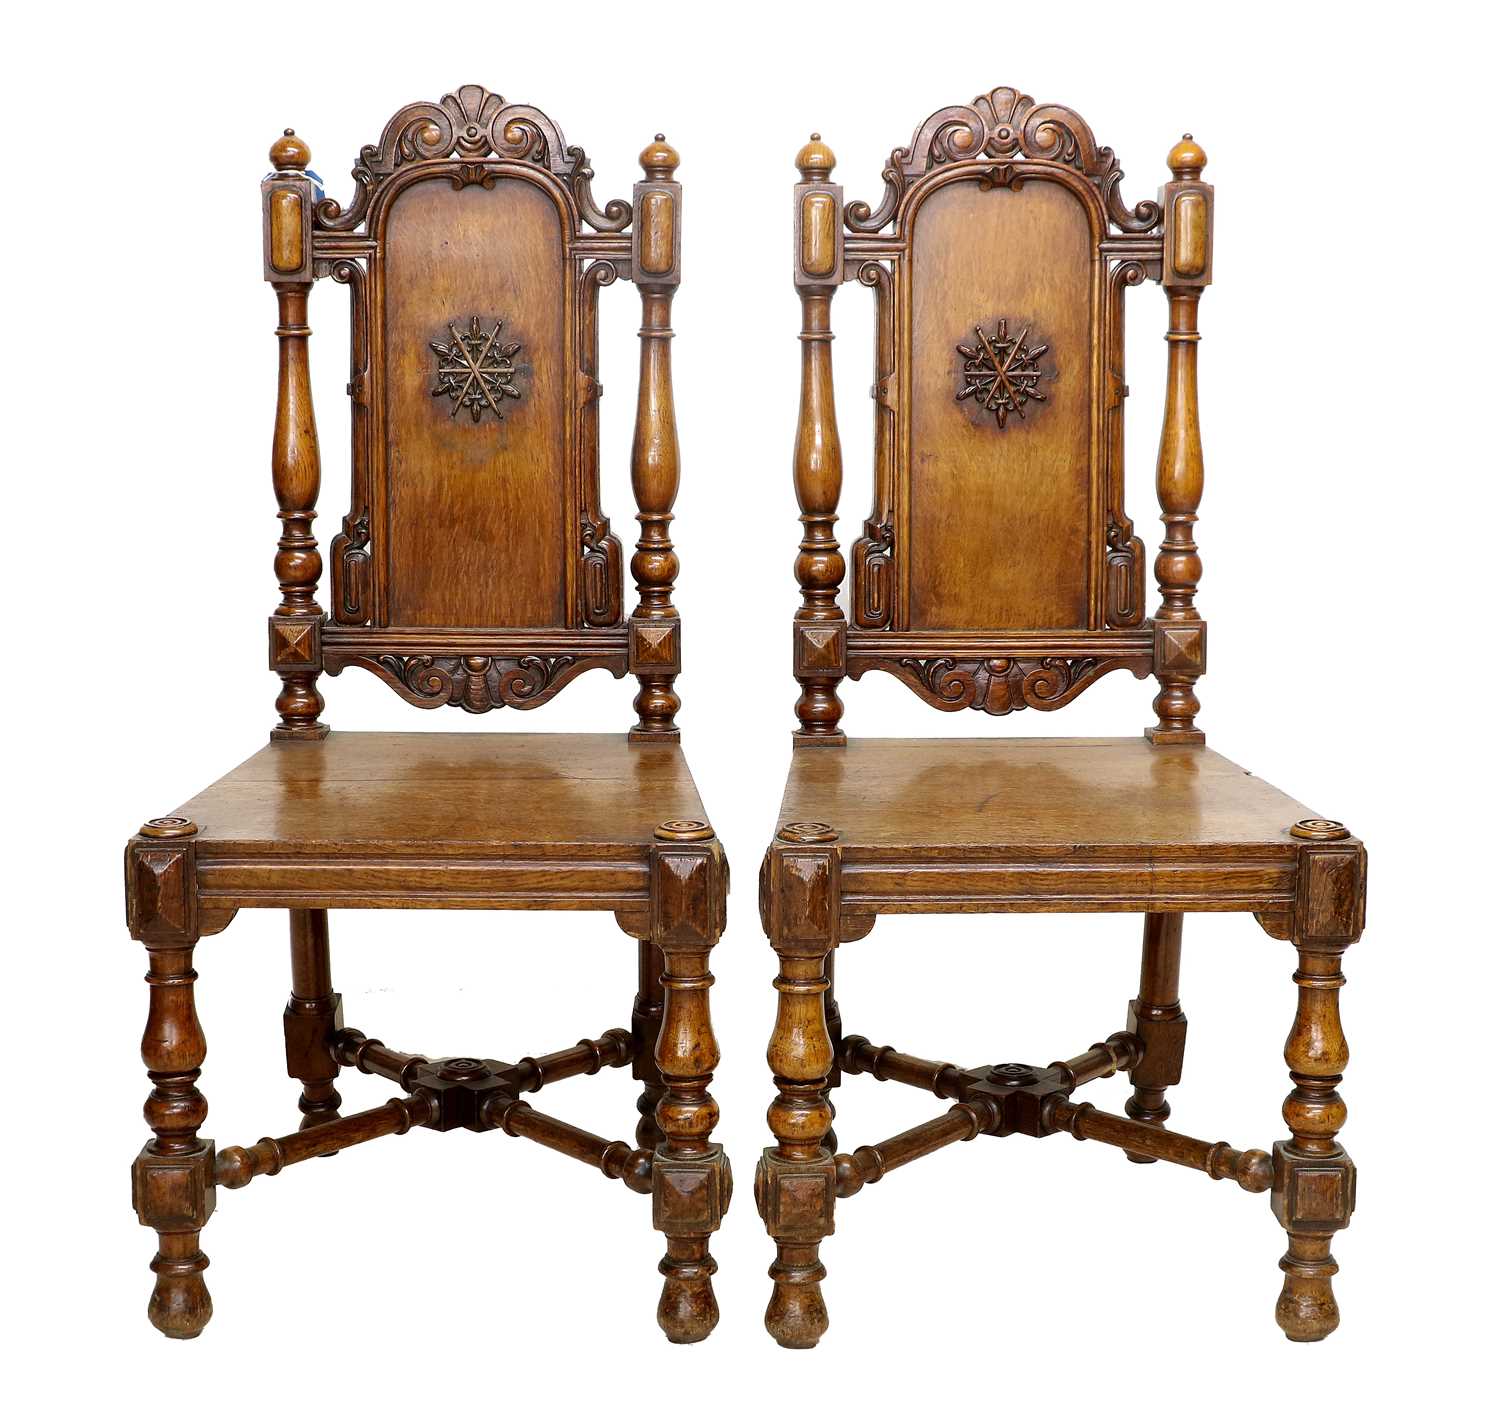 A Pair of Carved Oak Hall Chairs, by Gillows of Lancaster, mid 19th century, the carved top rails